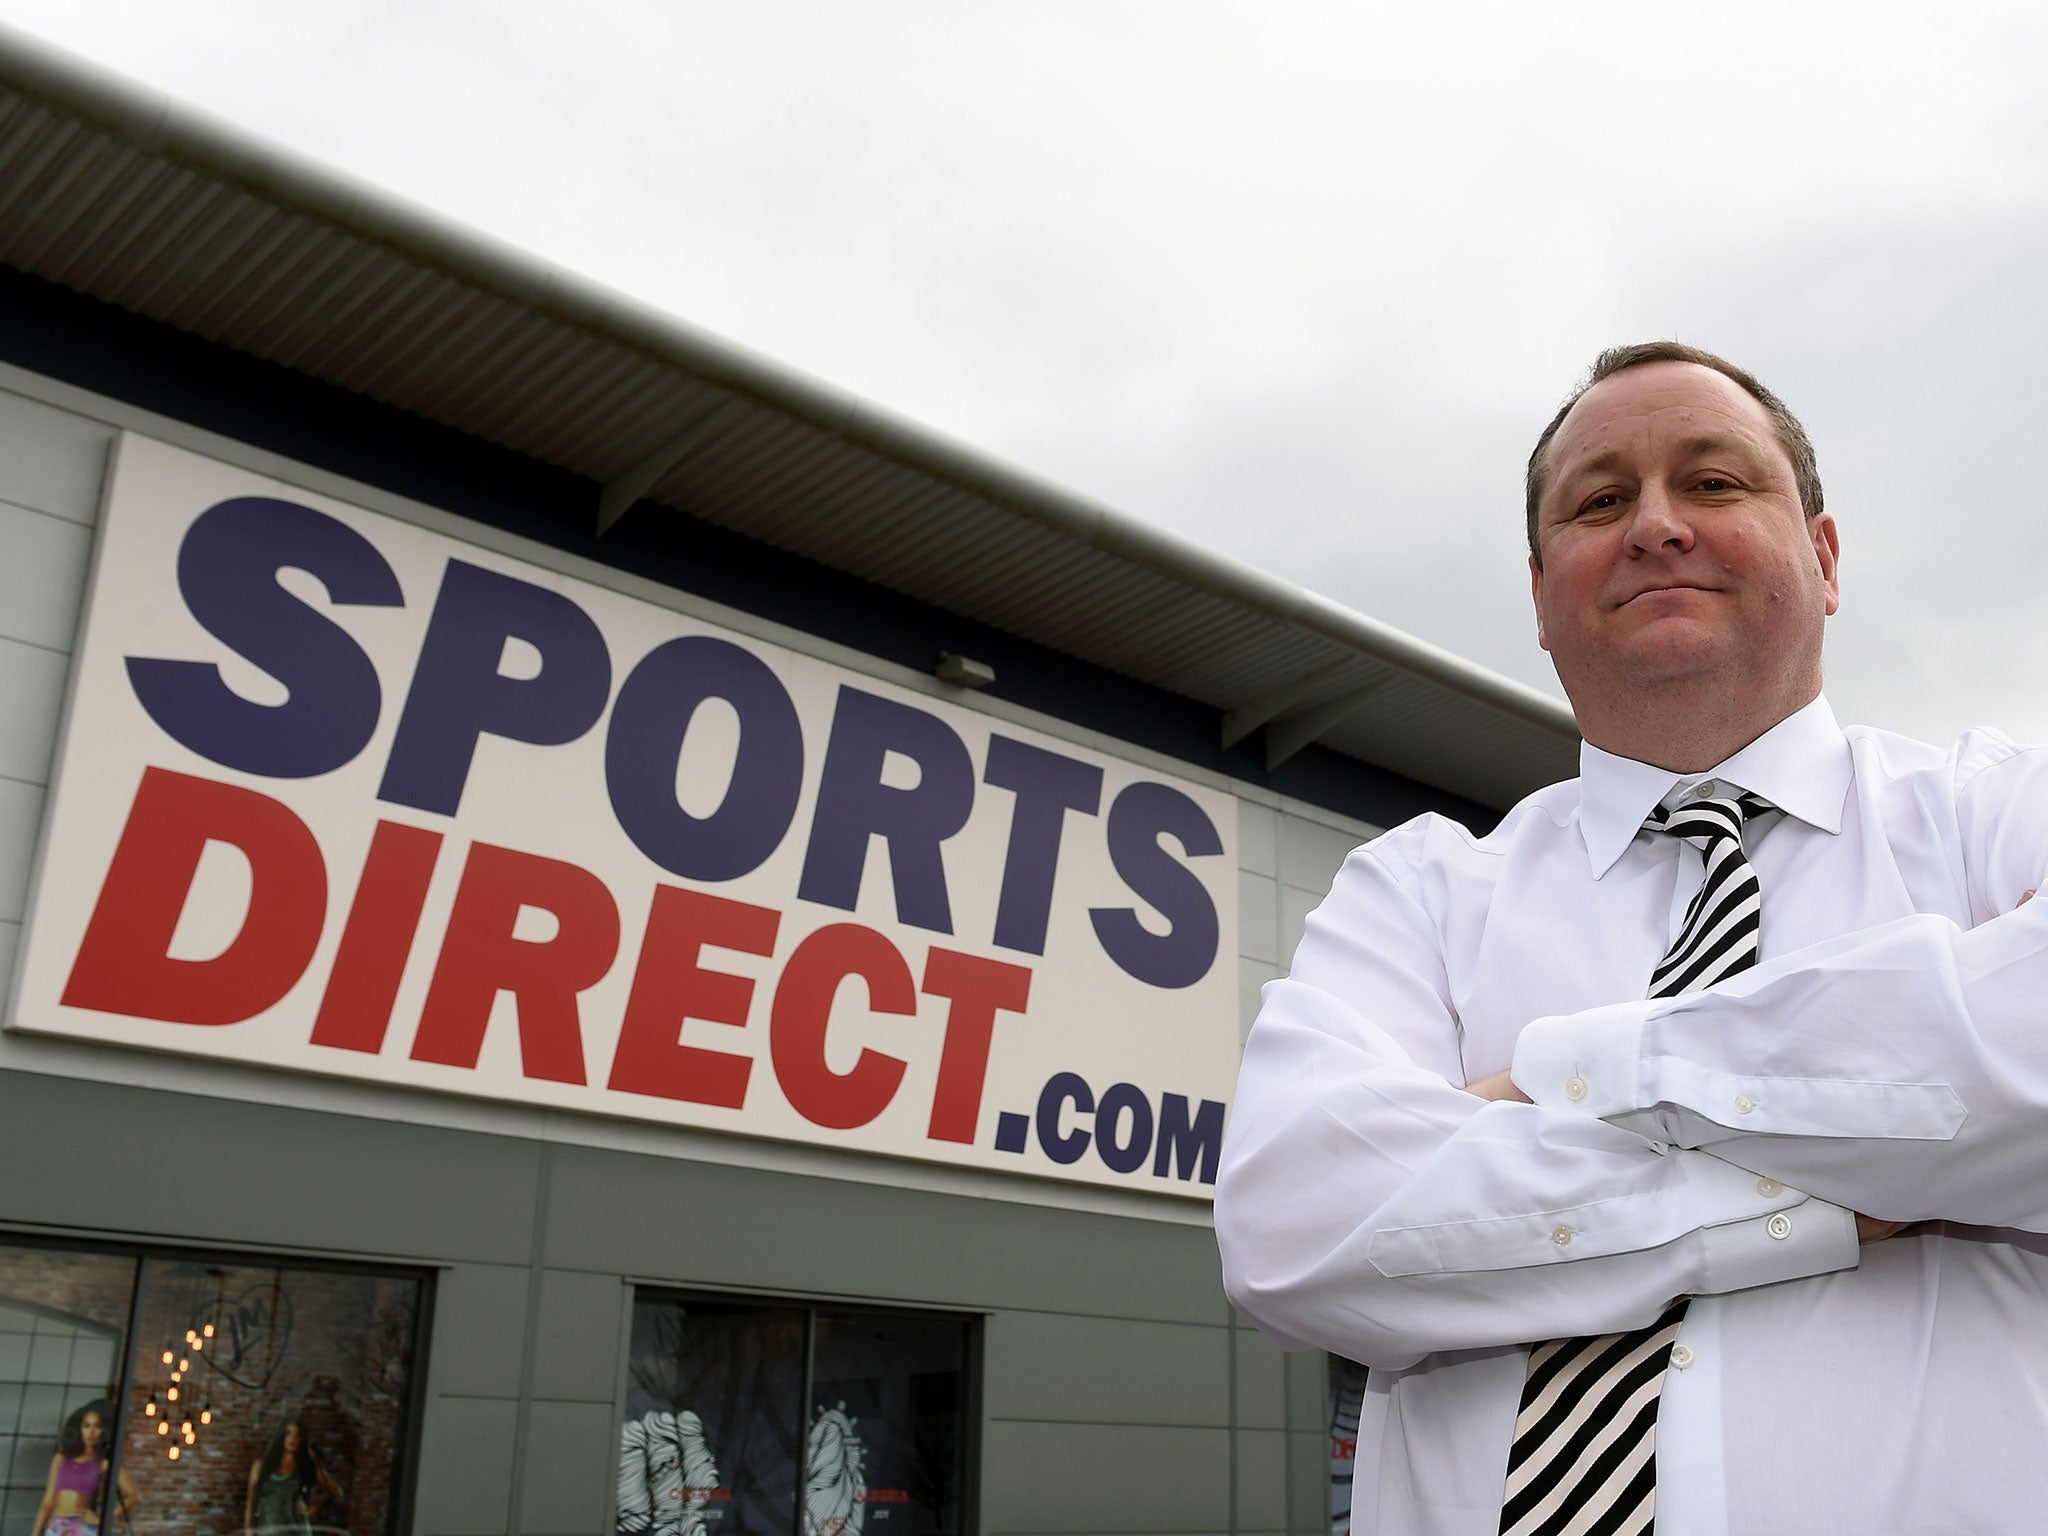 Sports Direct founder Mike Ashley outside the headquarters in Derbyshire. The retailer expects huge losses from the pound's 'flash crash'